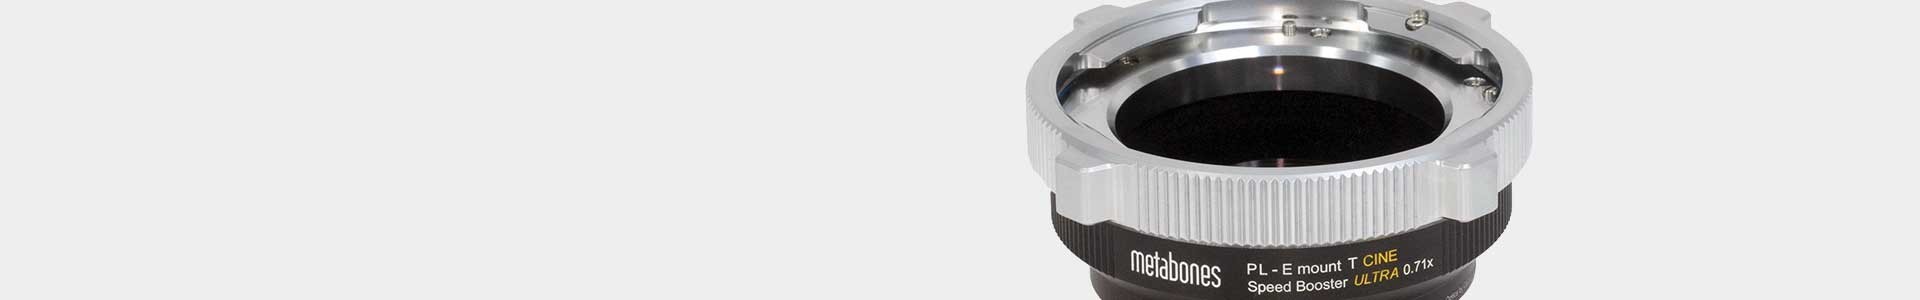 Lens Mount Adapters - All combinations - Avacab